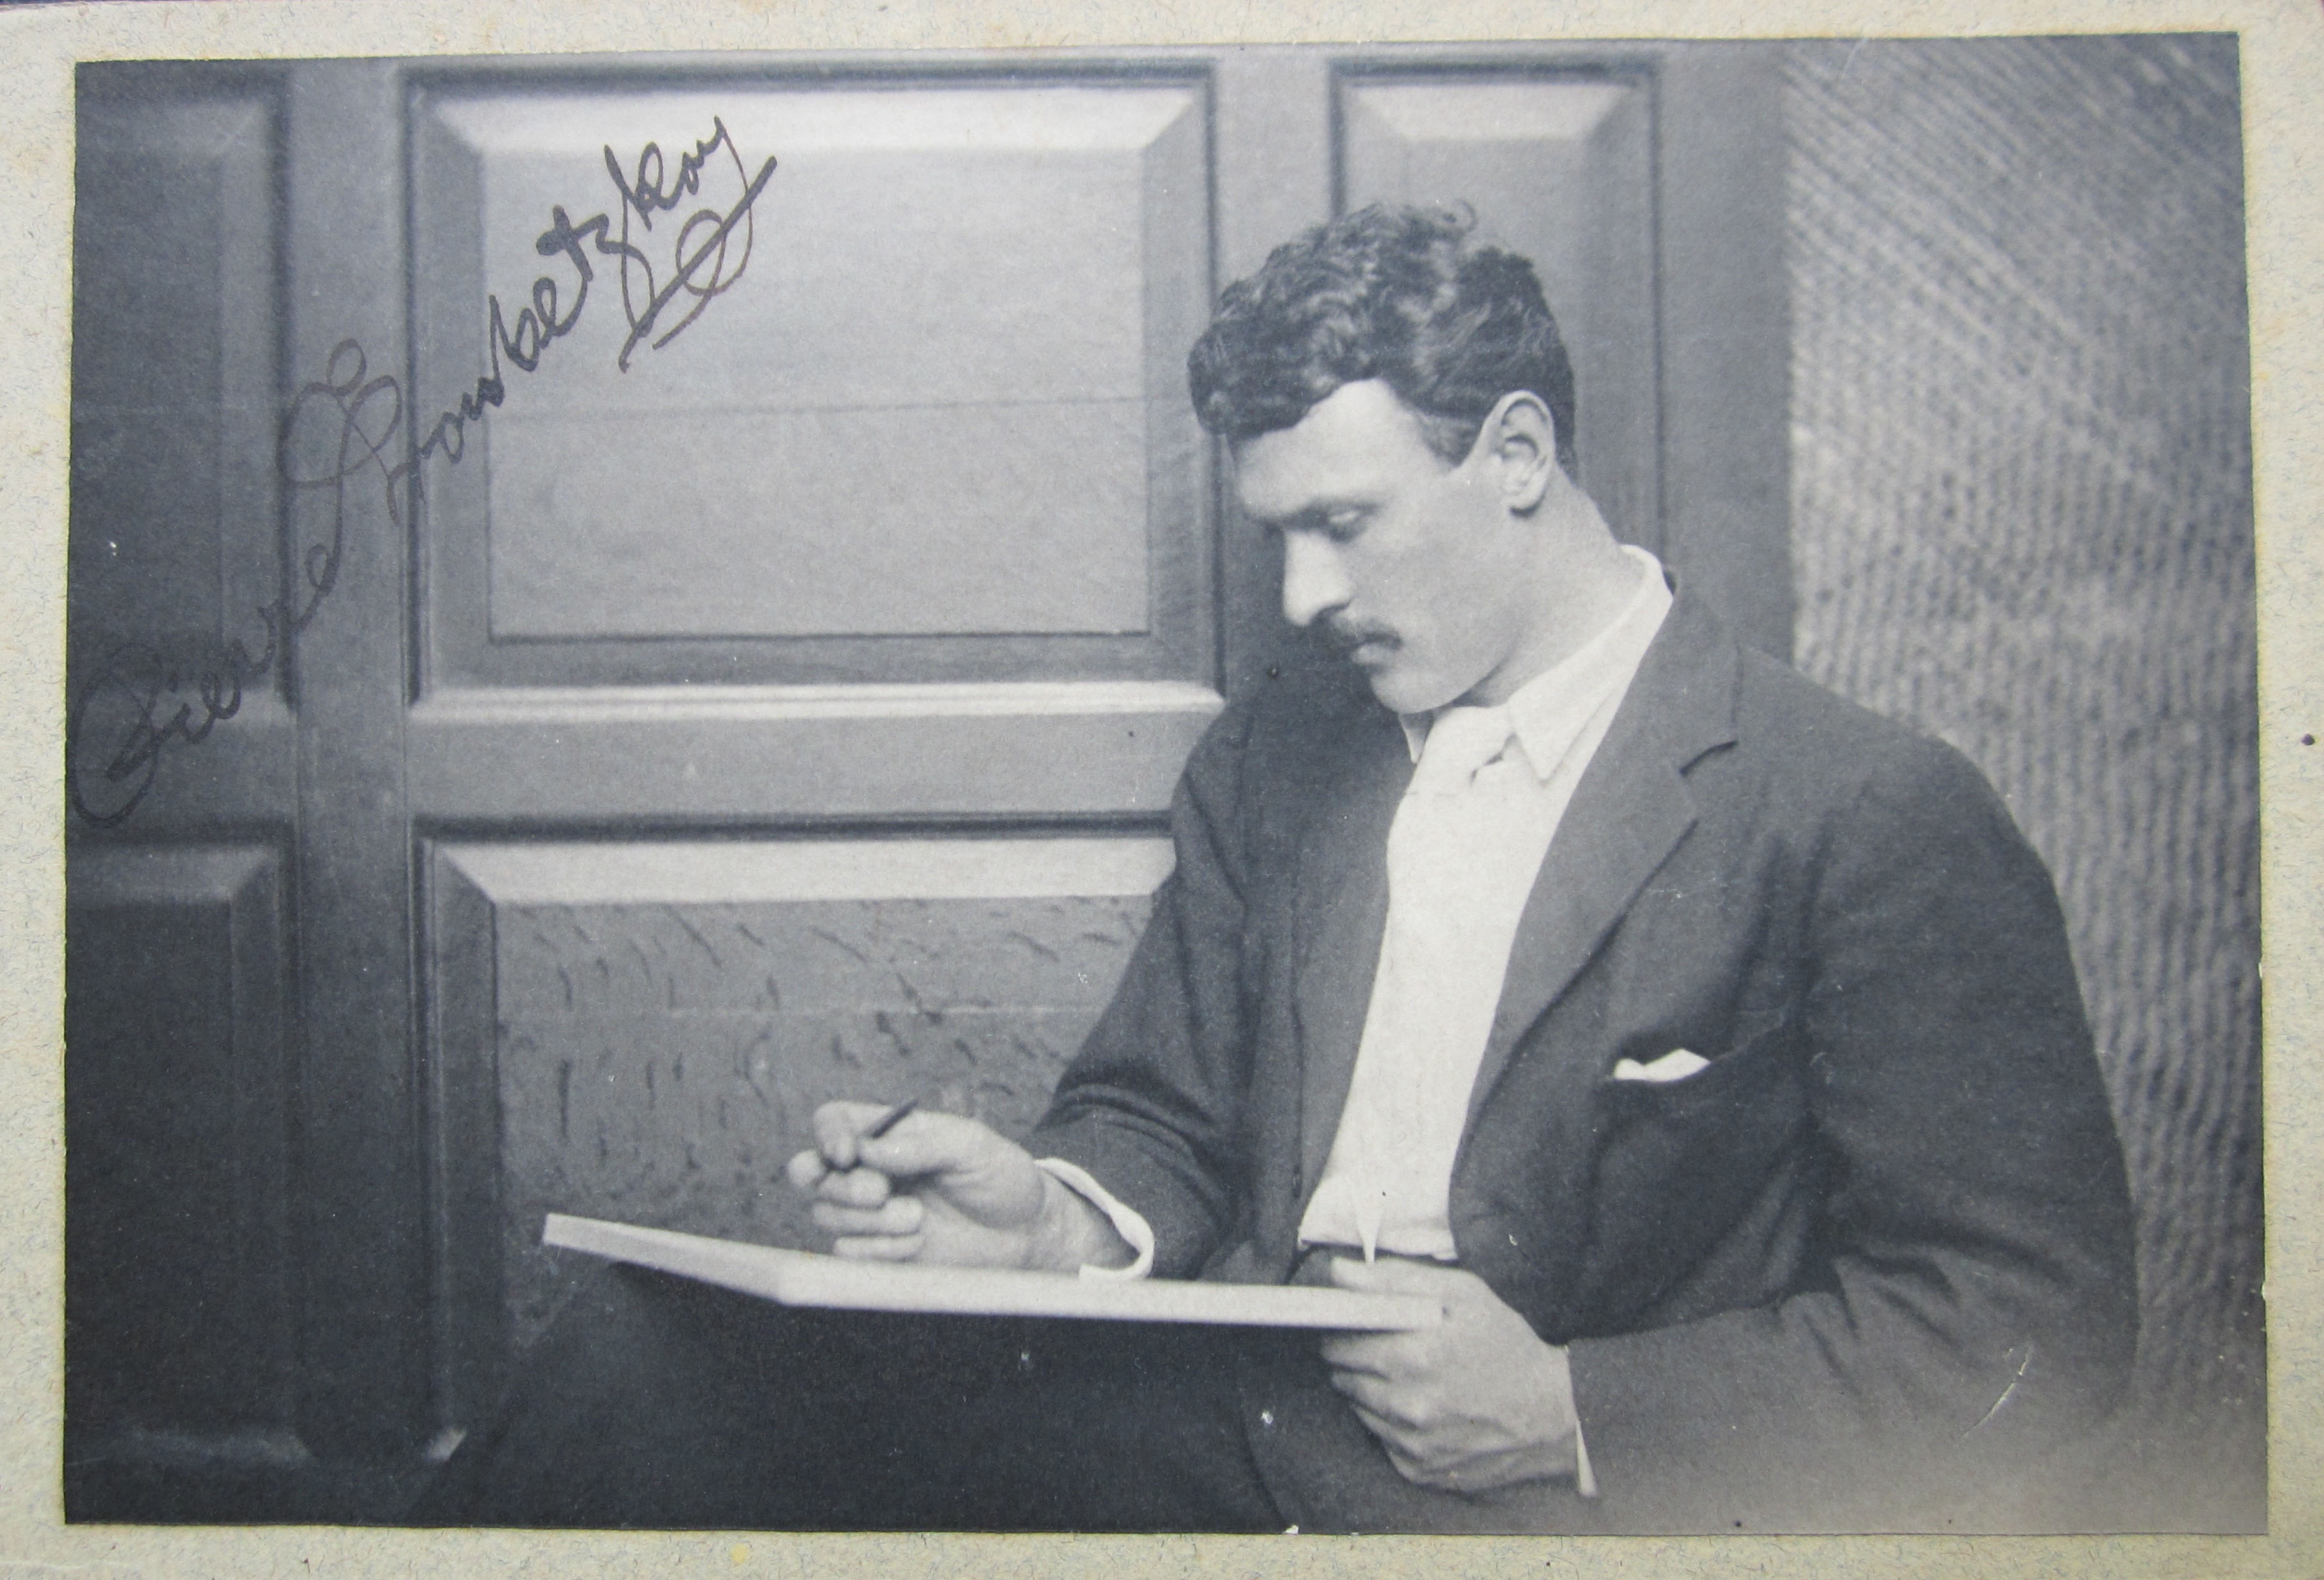 Photograph by Fred Hollyer of Prince Pierre Troubetzkoy sketching, 1 August 1894. (MSS 2532. Photograph by Donna Stapley)